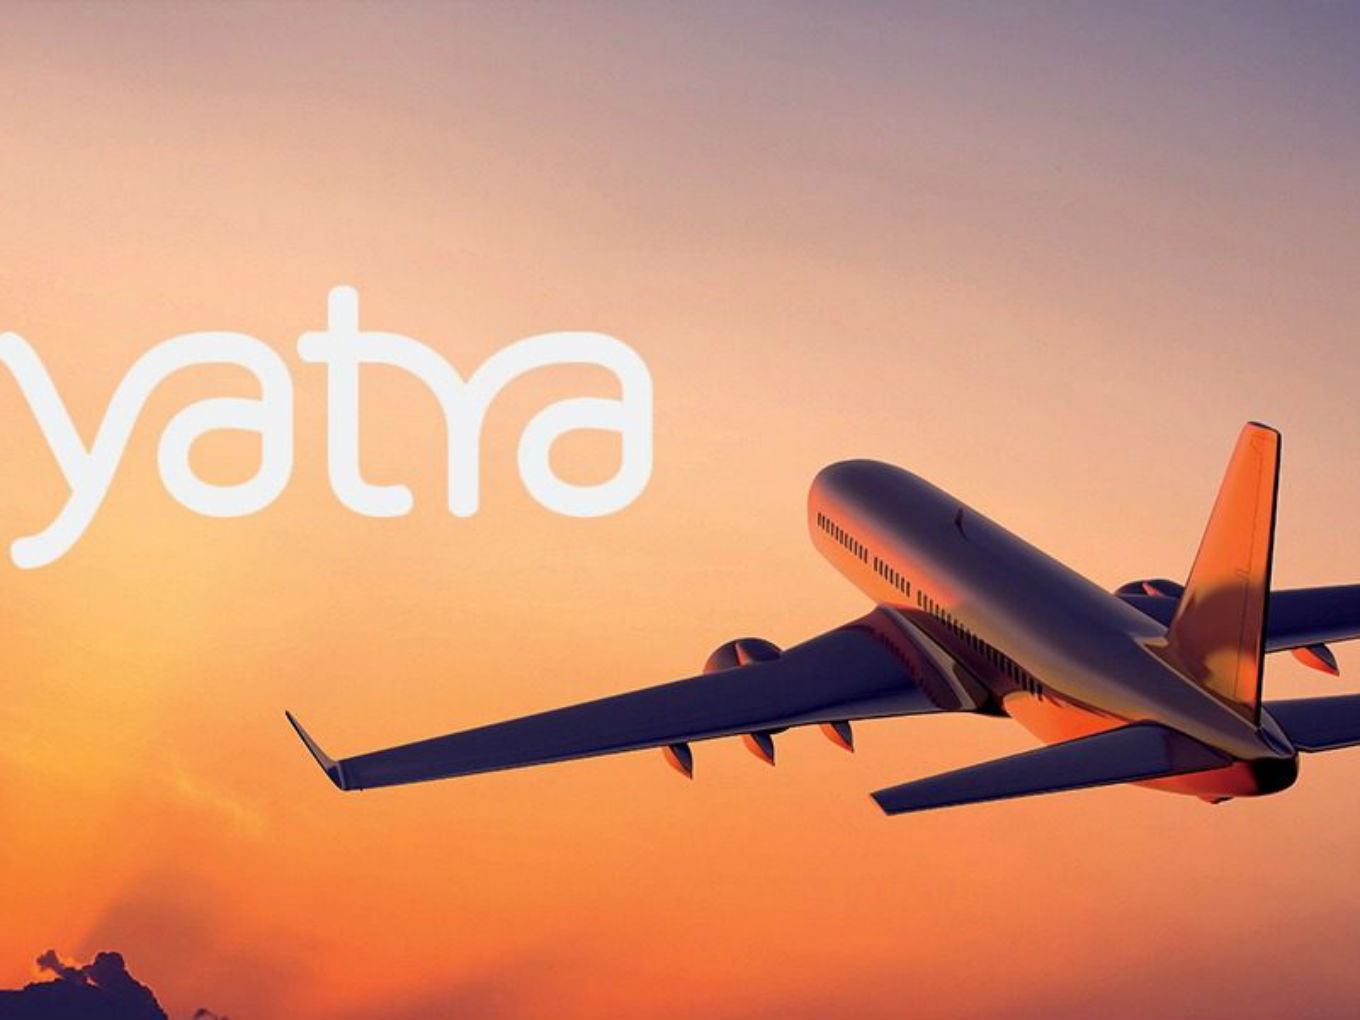 Yatra Begins FY20 With 17.8% Increase In Losses For Q1